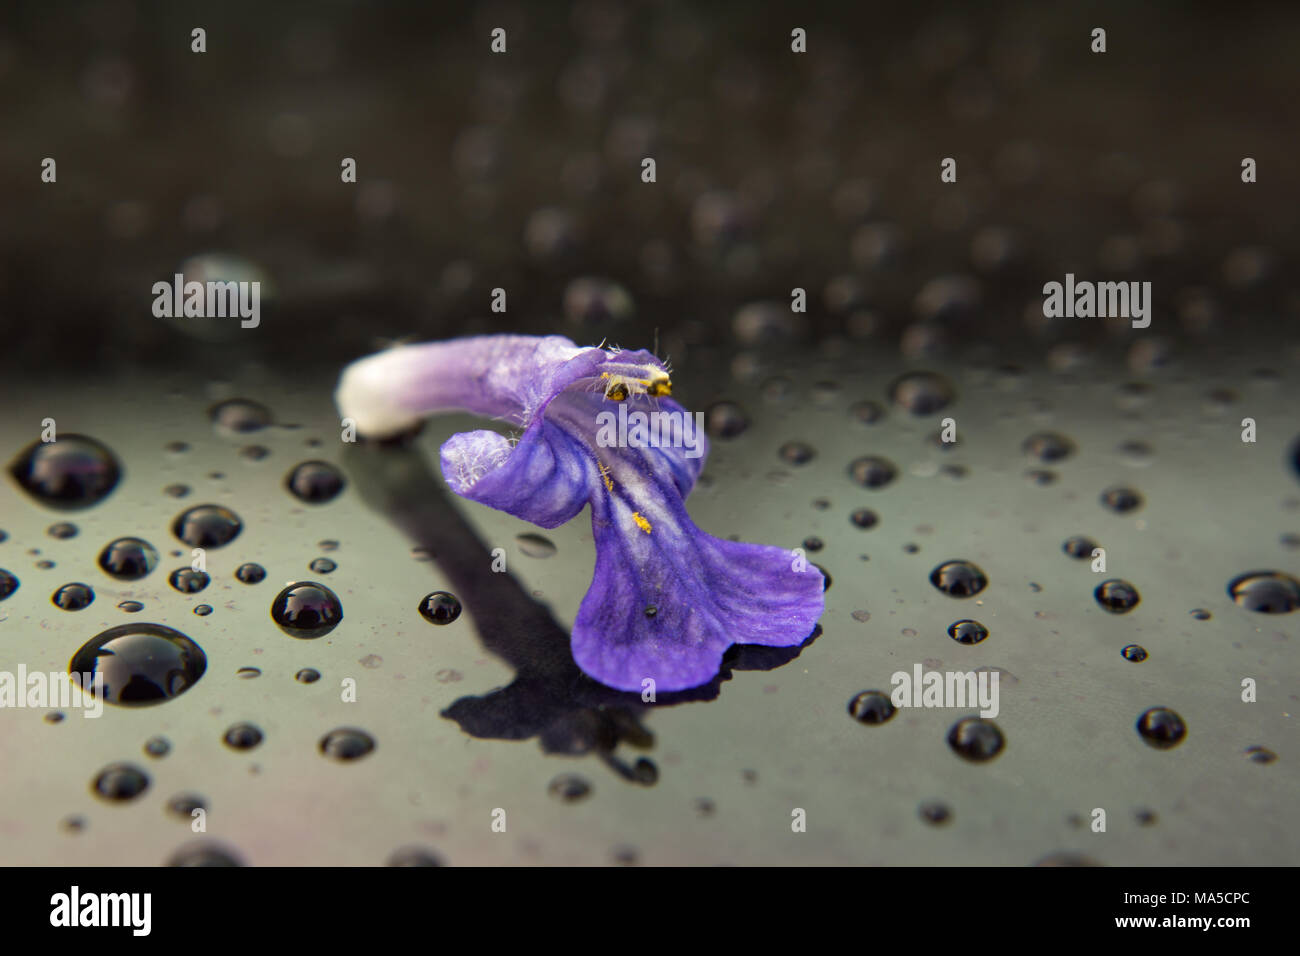 Macro of one flower of Ajuga reptans. A flower is on a glass and there are the drops too. Stock Photo